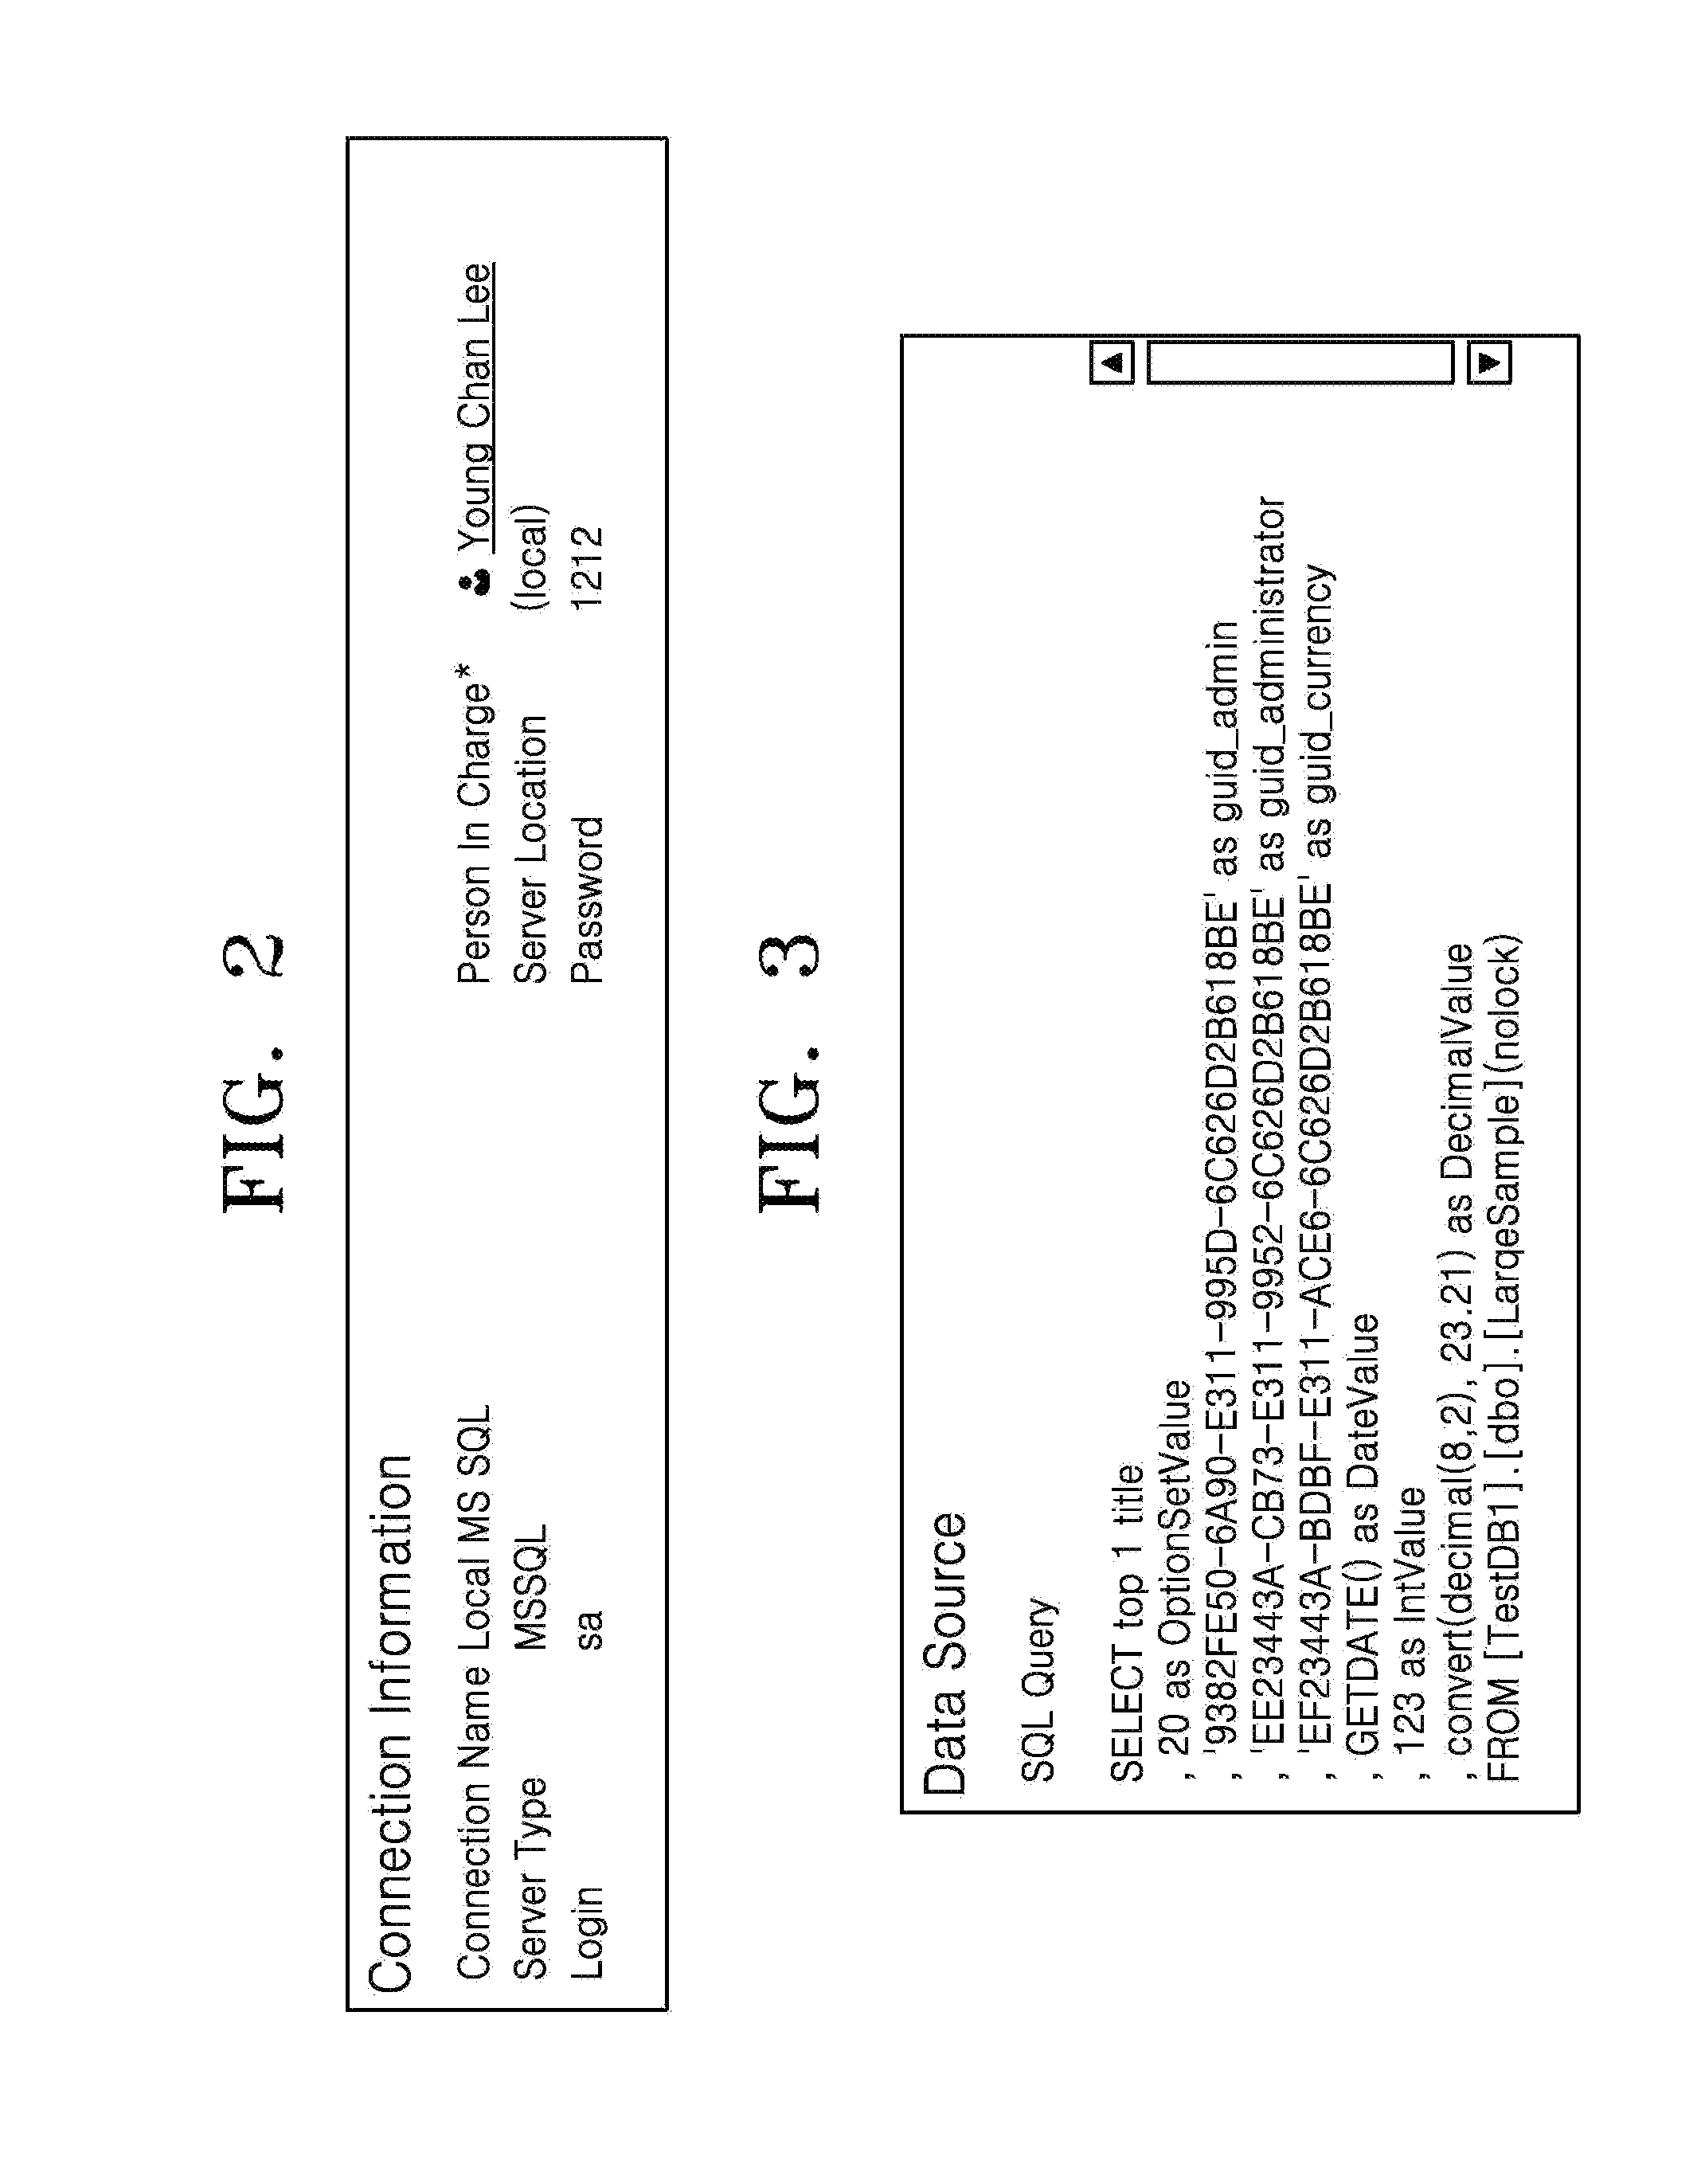 Crm-based data migration system and method